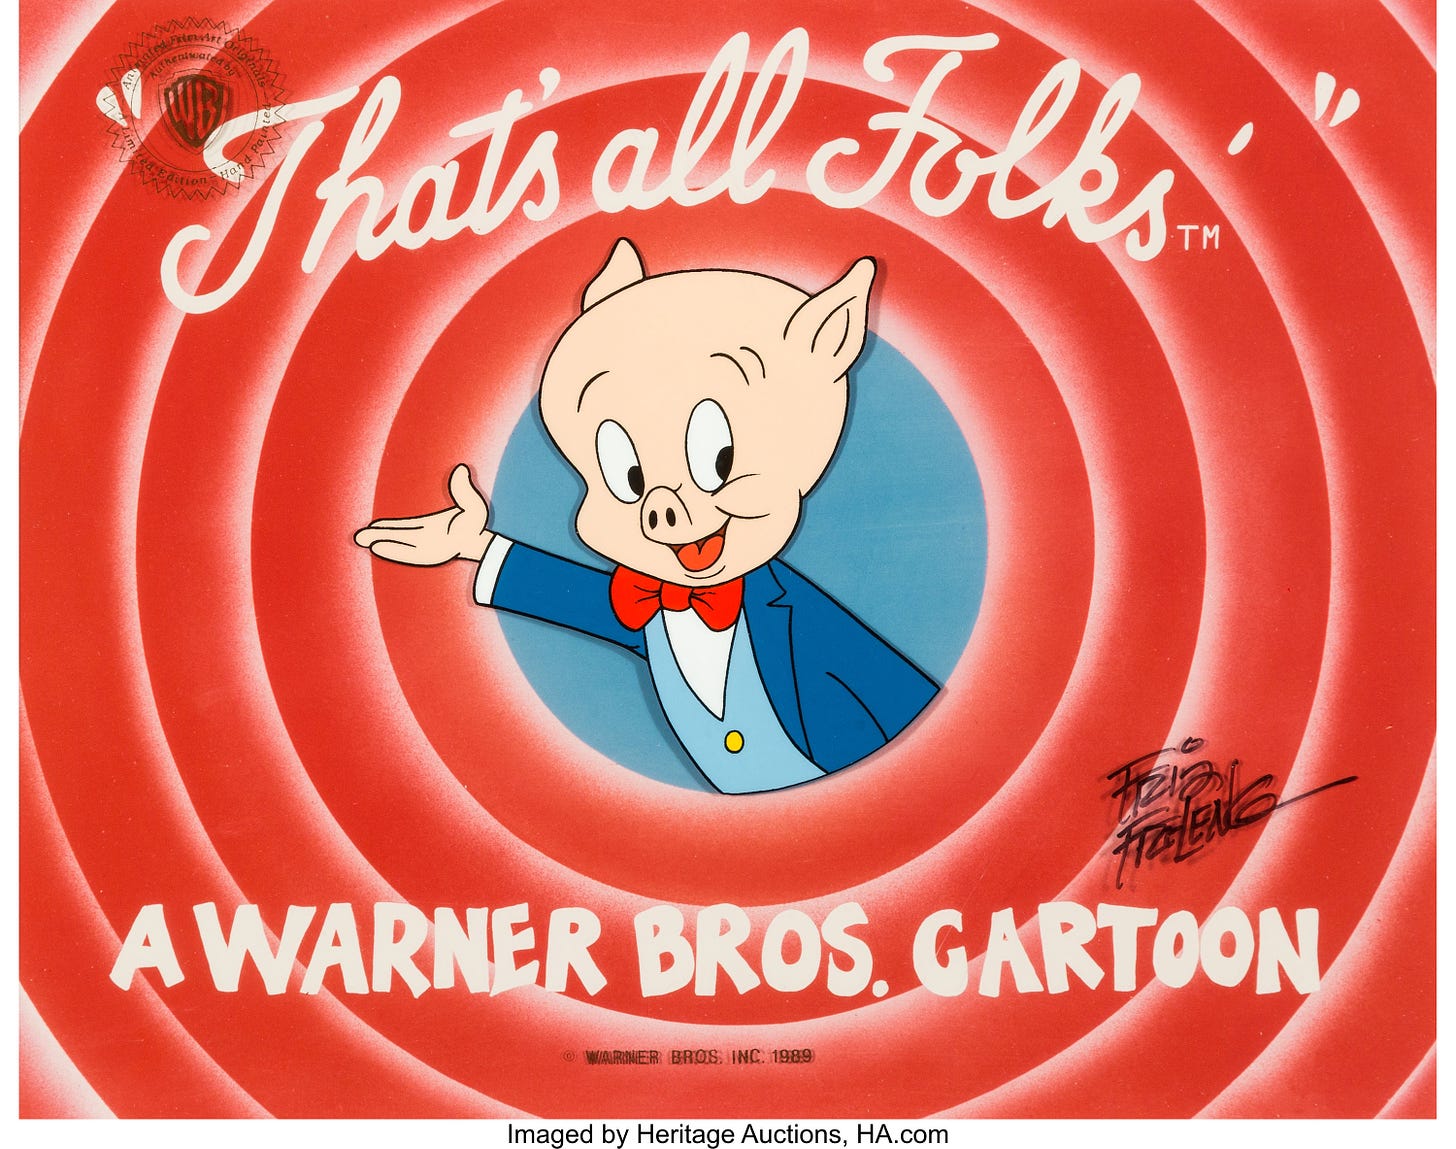 That's All Folks" Porky Pig Limited Edition Cel Signed by Friz | Lot #99425  | Heritage Auctions